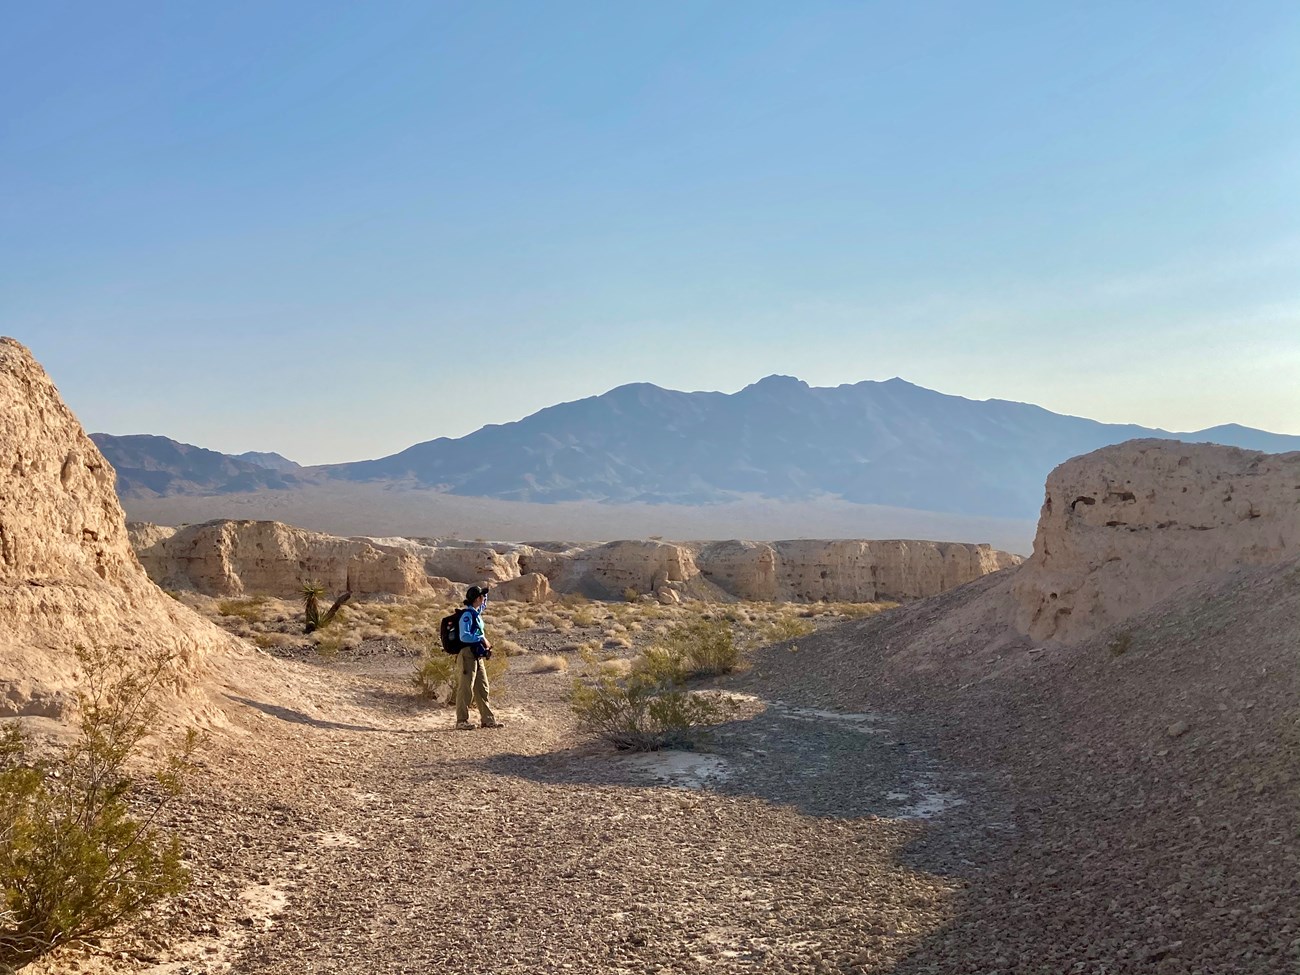 Hiker standing within a desert wash, surrounded by badlands and a mountain range.